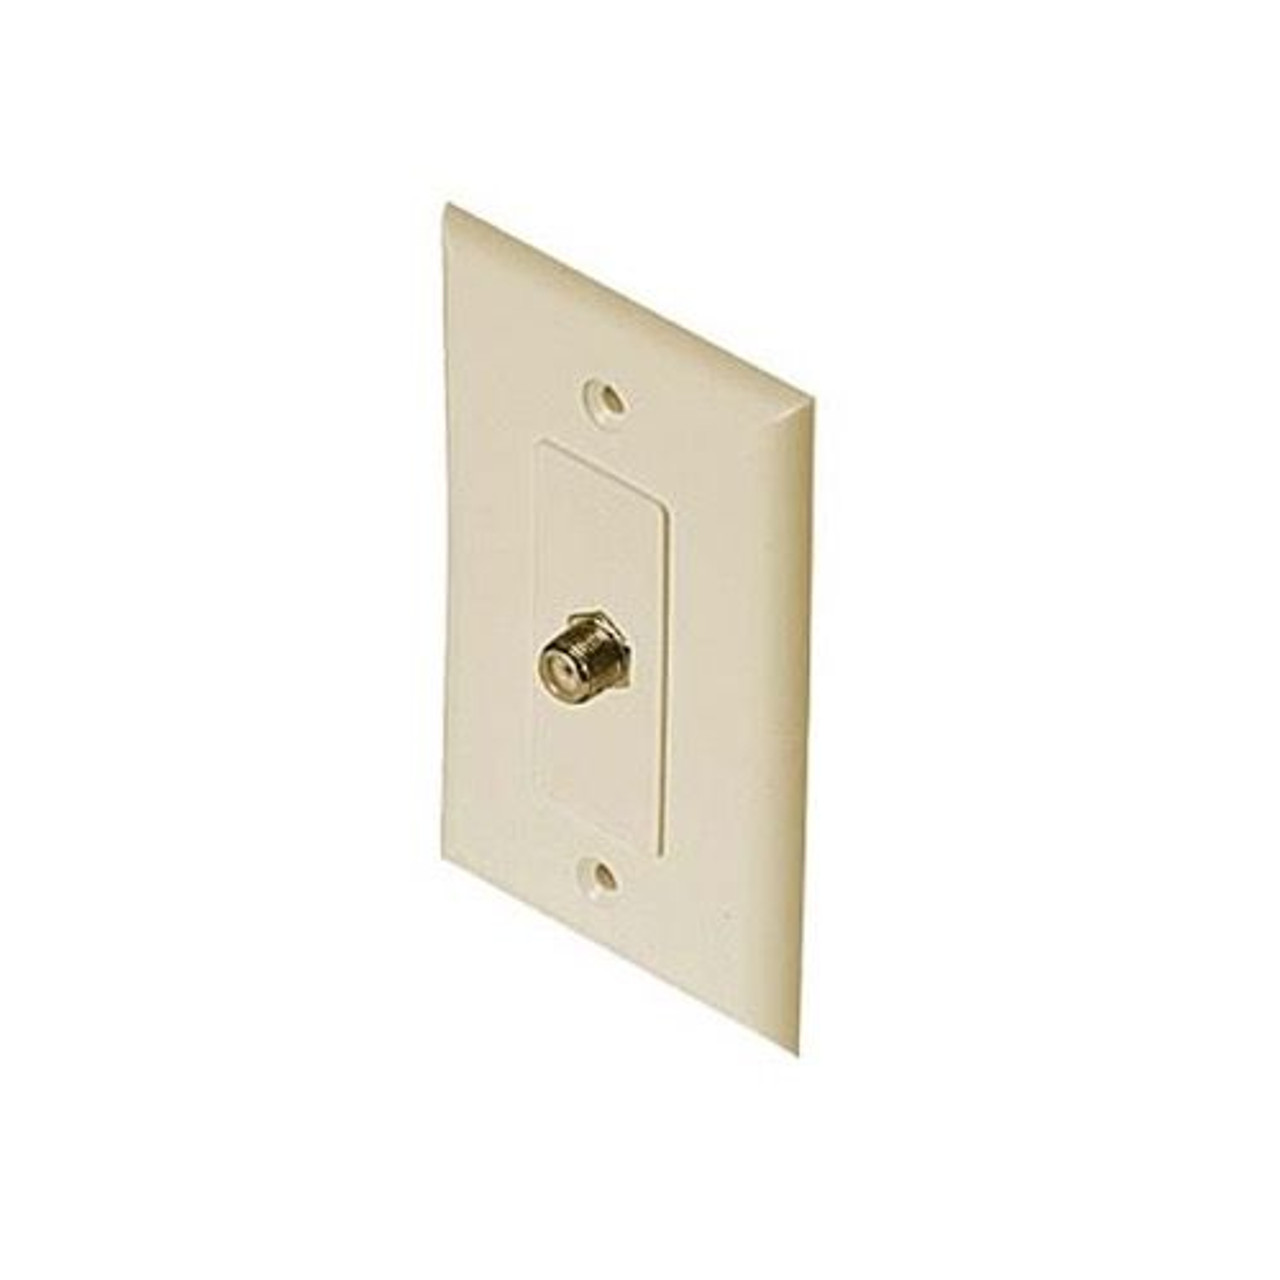 Eagle Wall Plate Wall F Jack Ivory F-81 Video 1 GHz 75 Ohm 1 Pack HDTV Aerial Antenna Plug, Flush Mount Female Outlet Connector